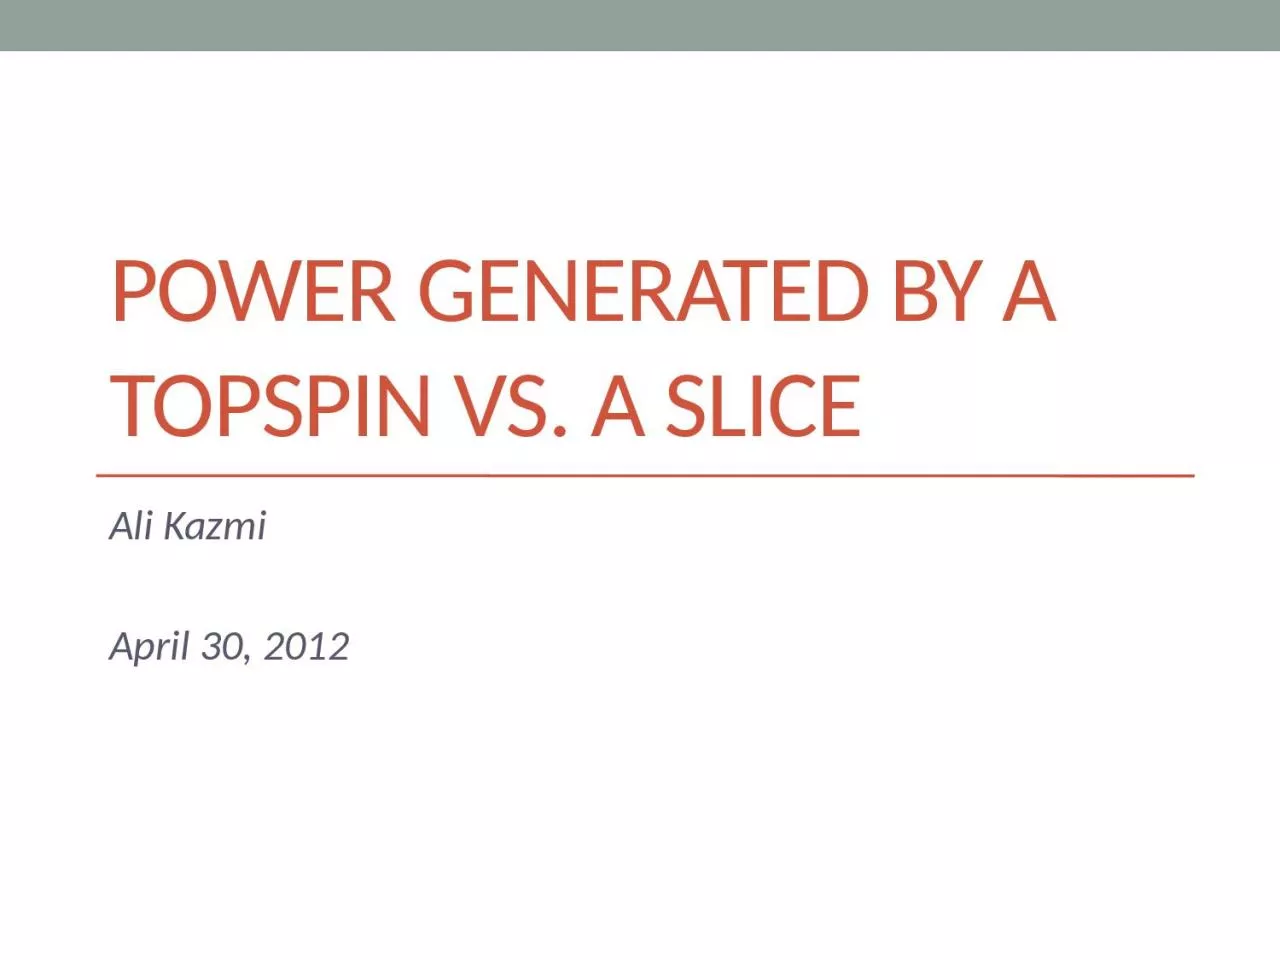 Power generated by a topspin vs. a slice